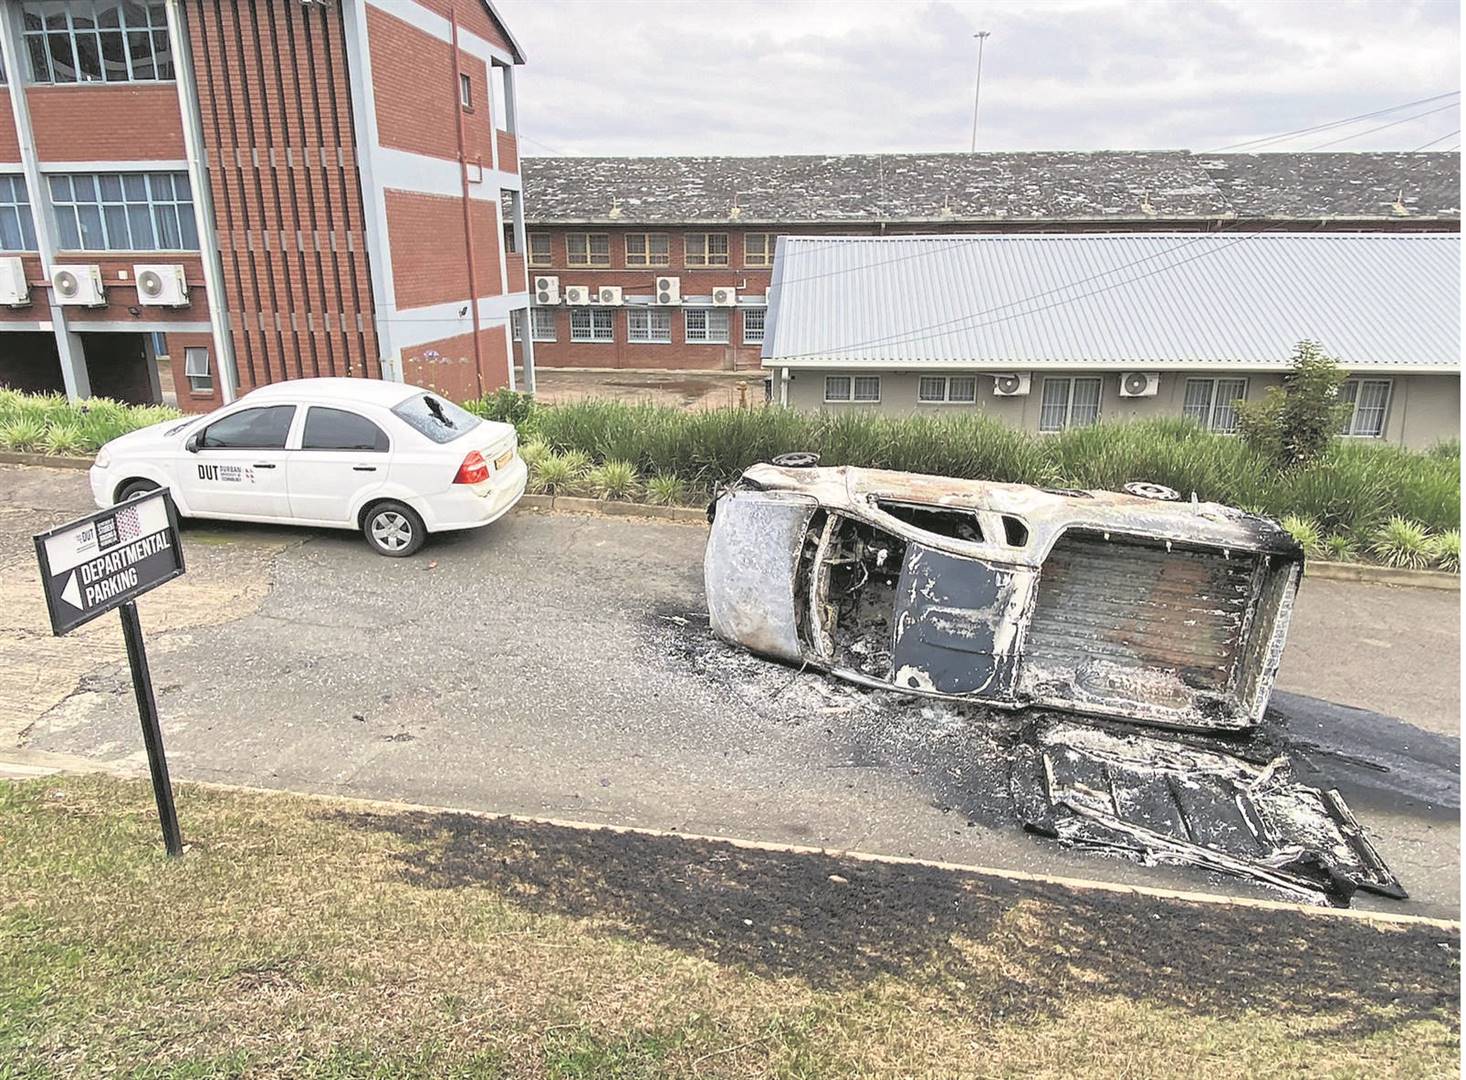 Two vehicles were damaged and torched at the Durban University of Technology Indumiso campus on Wednesday morning.